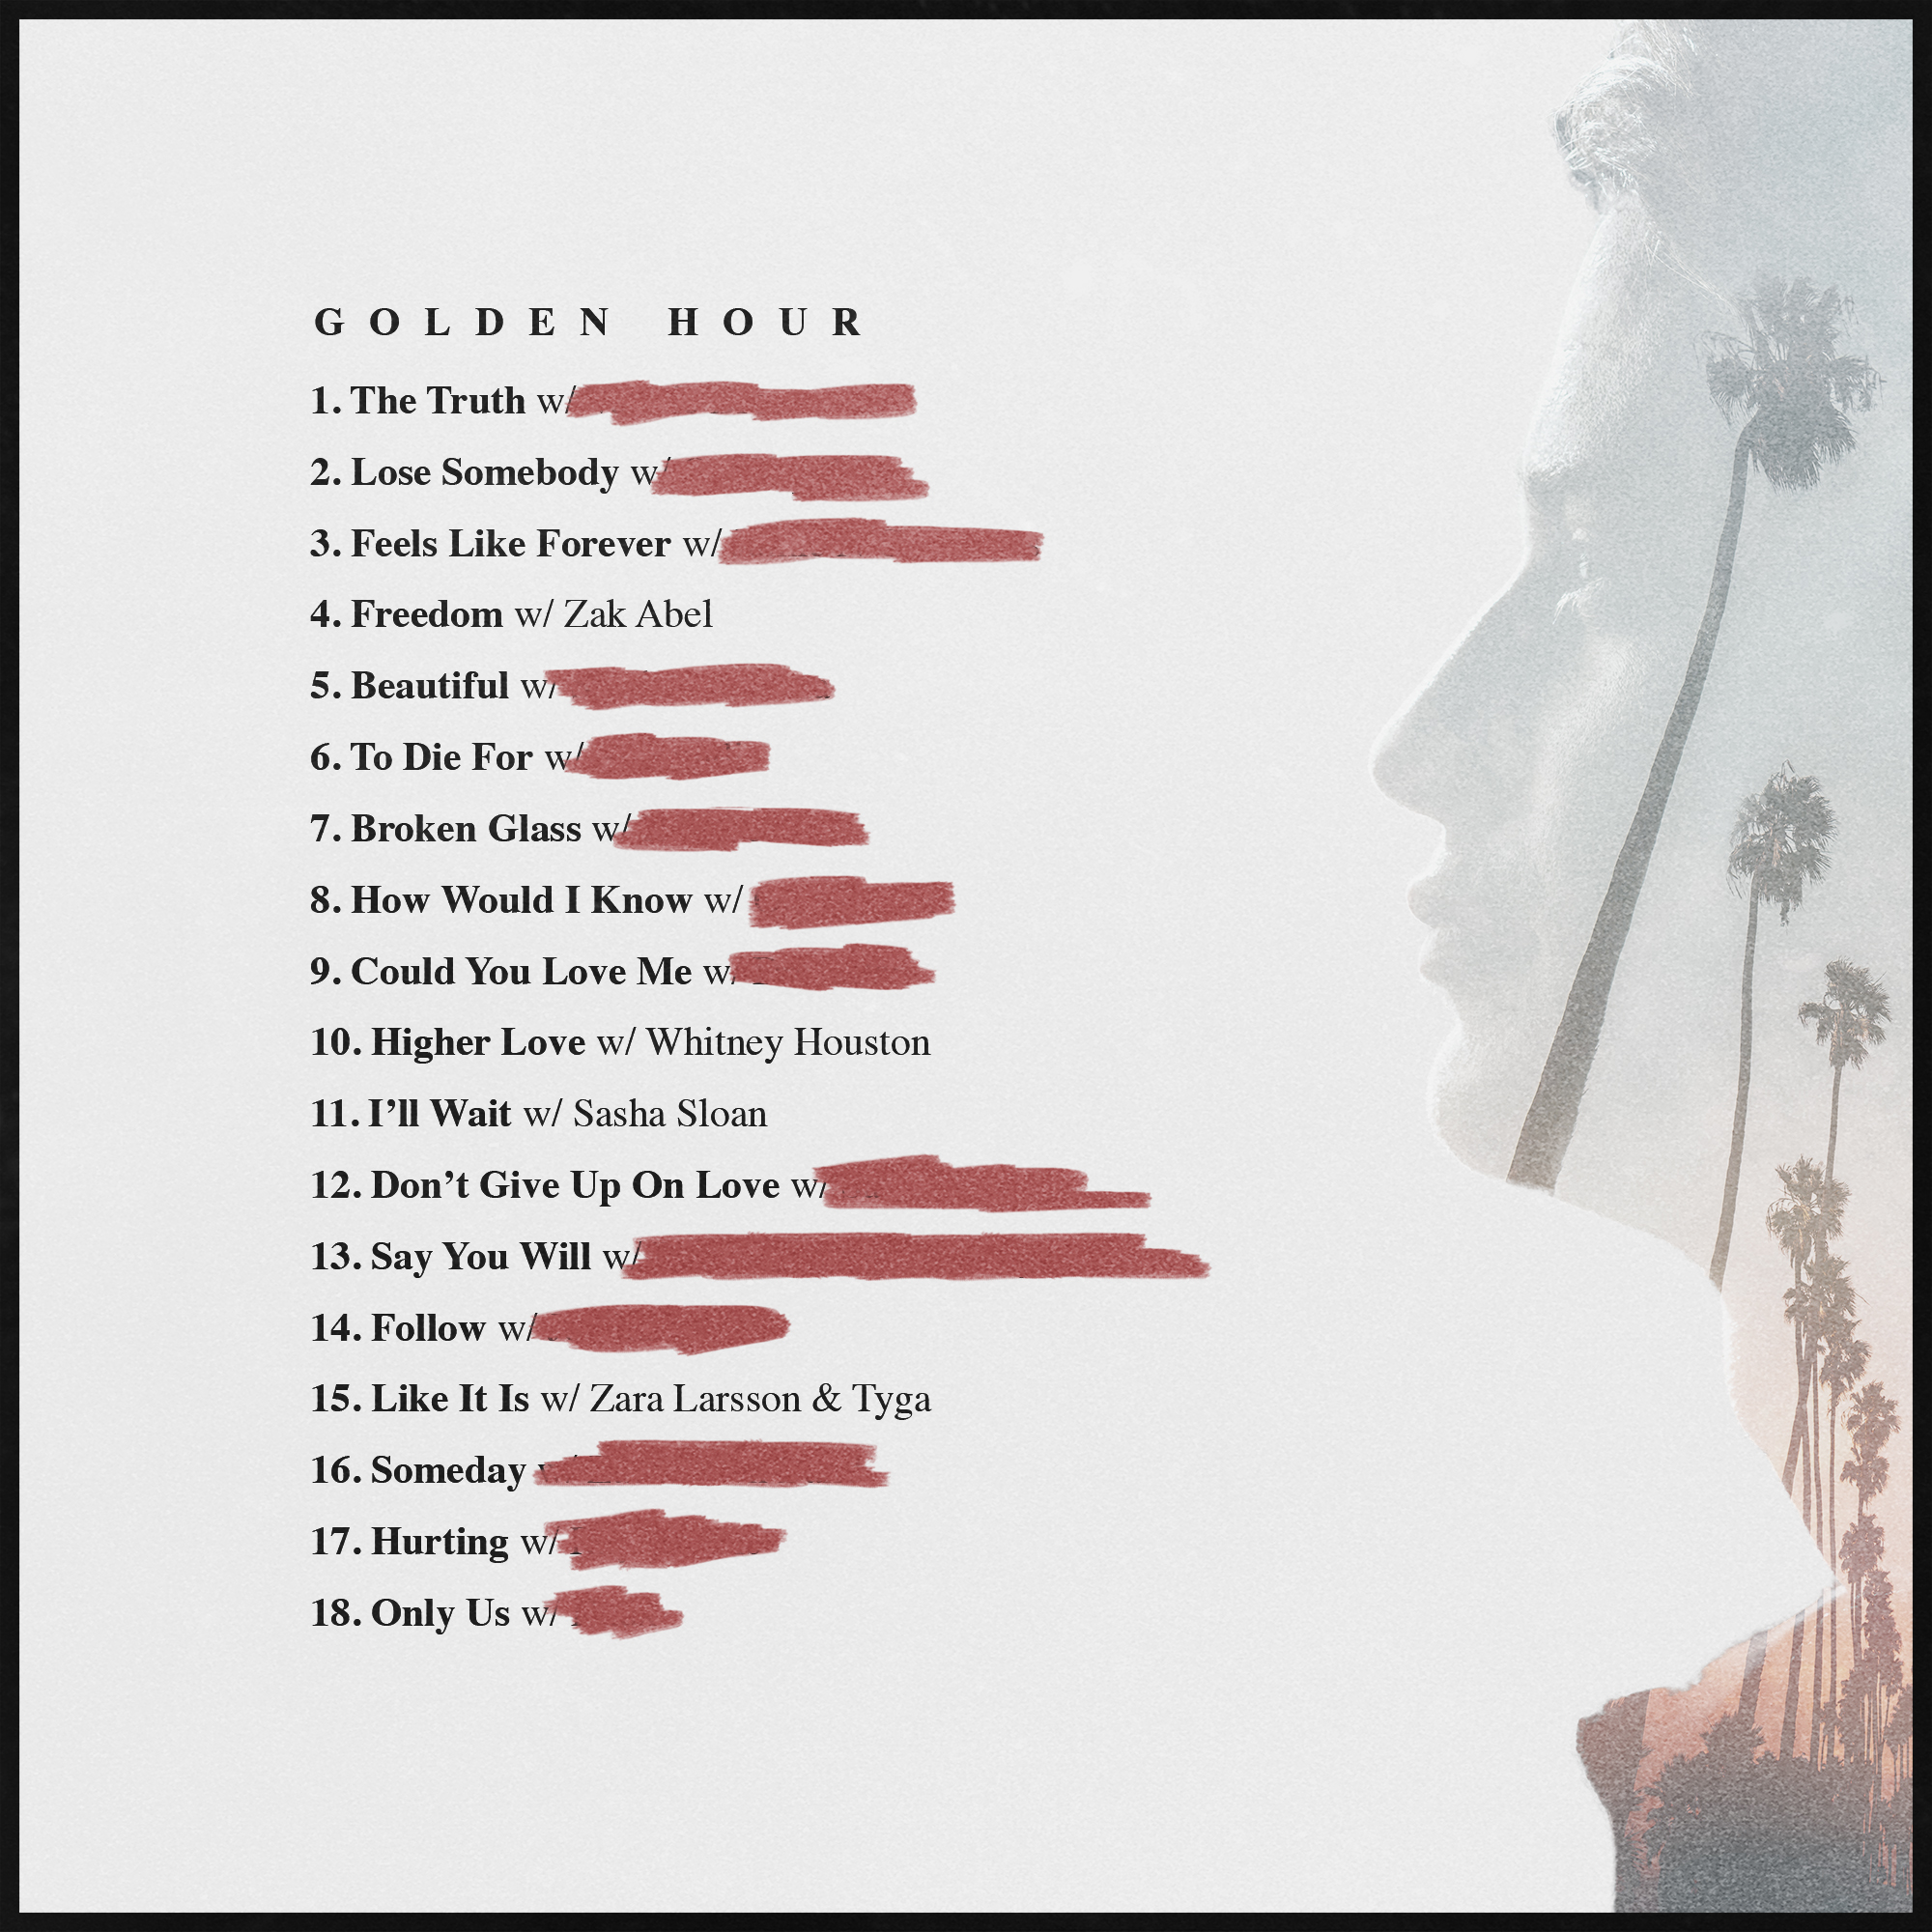 Golden Hour, the tracklist | See what to expect from the upcoming album